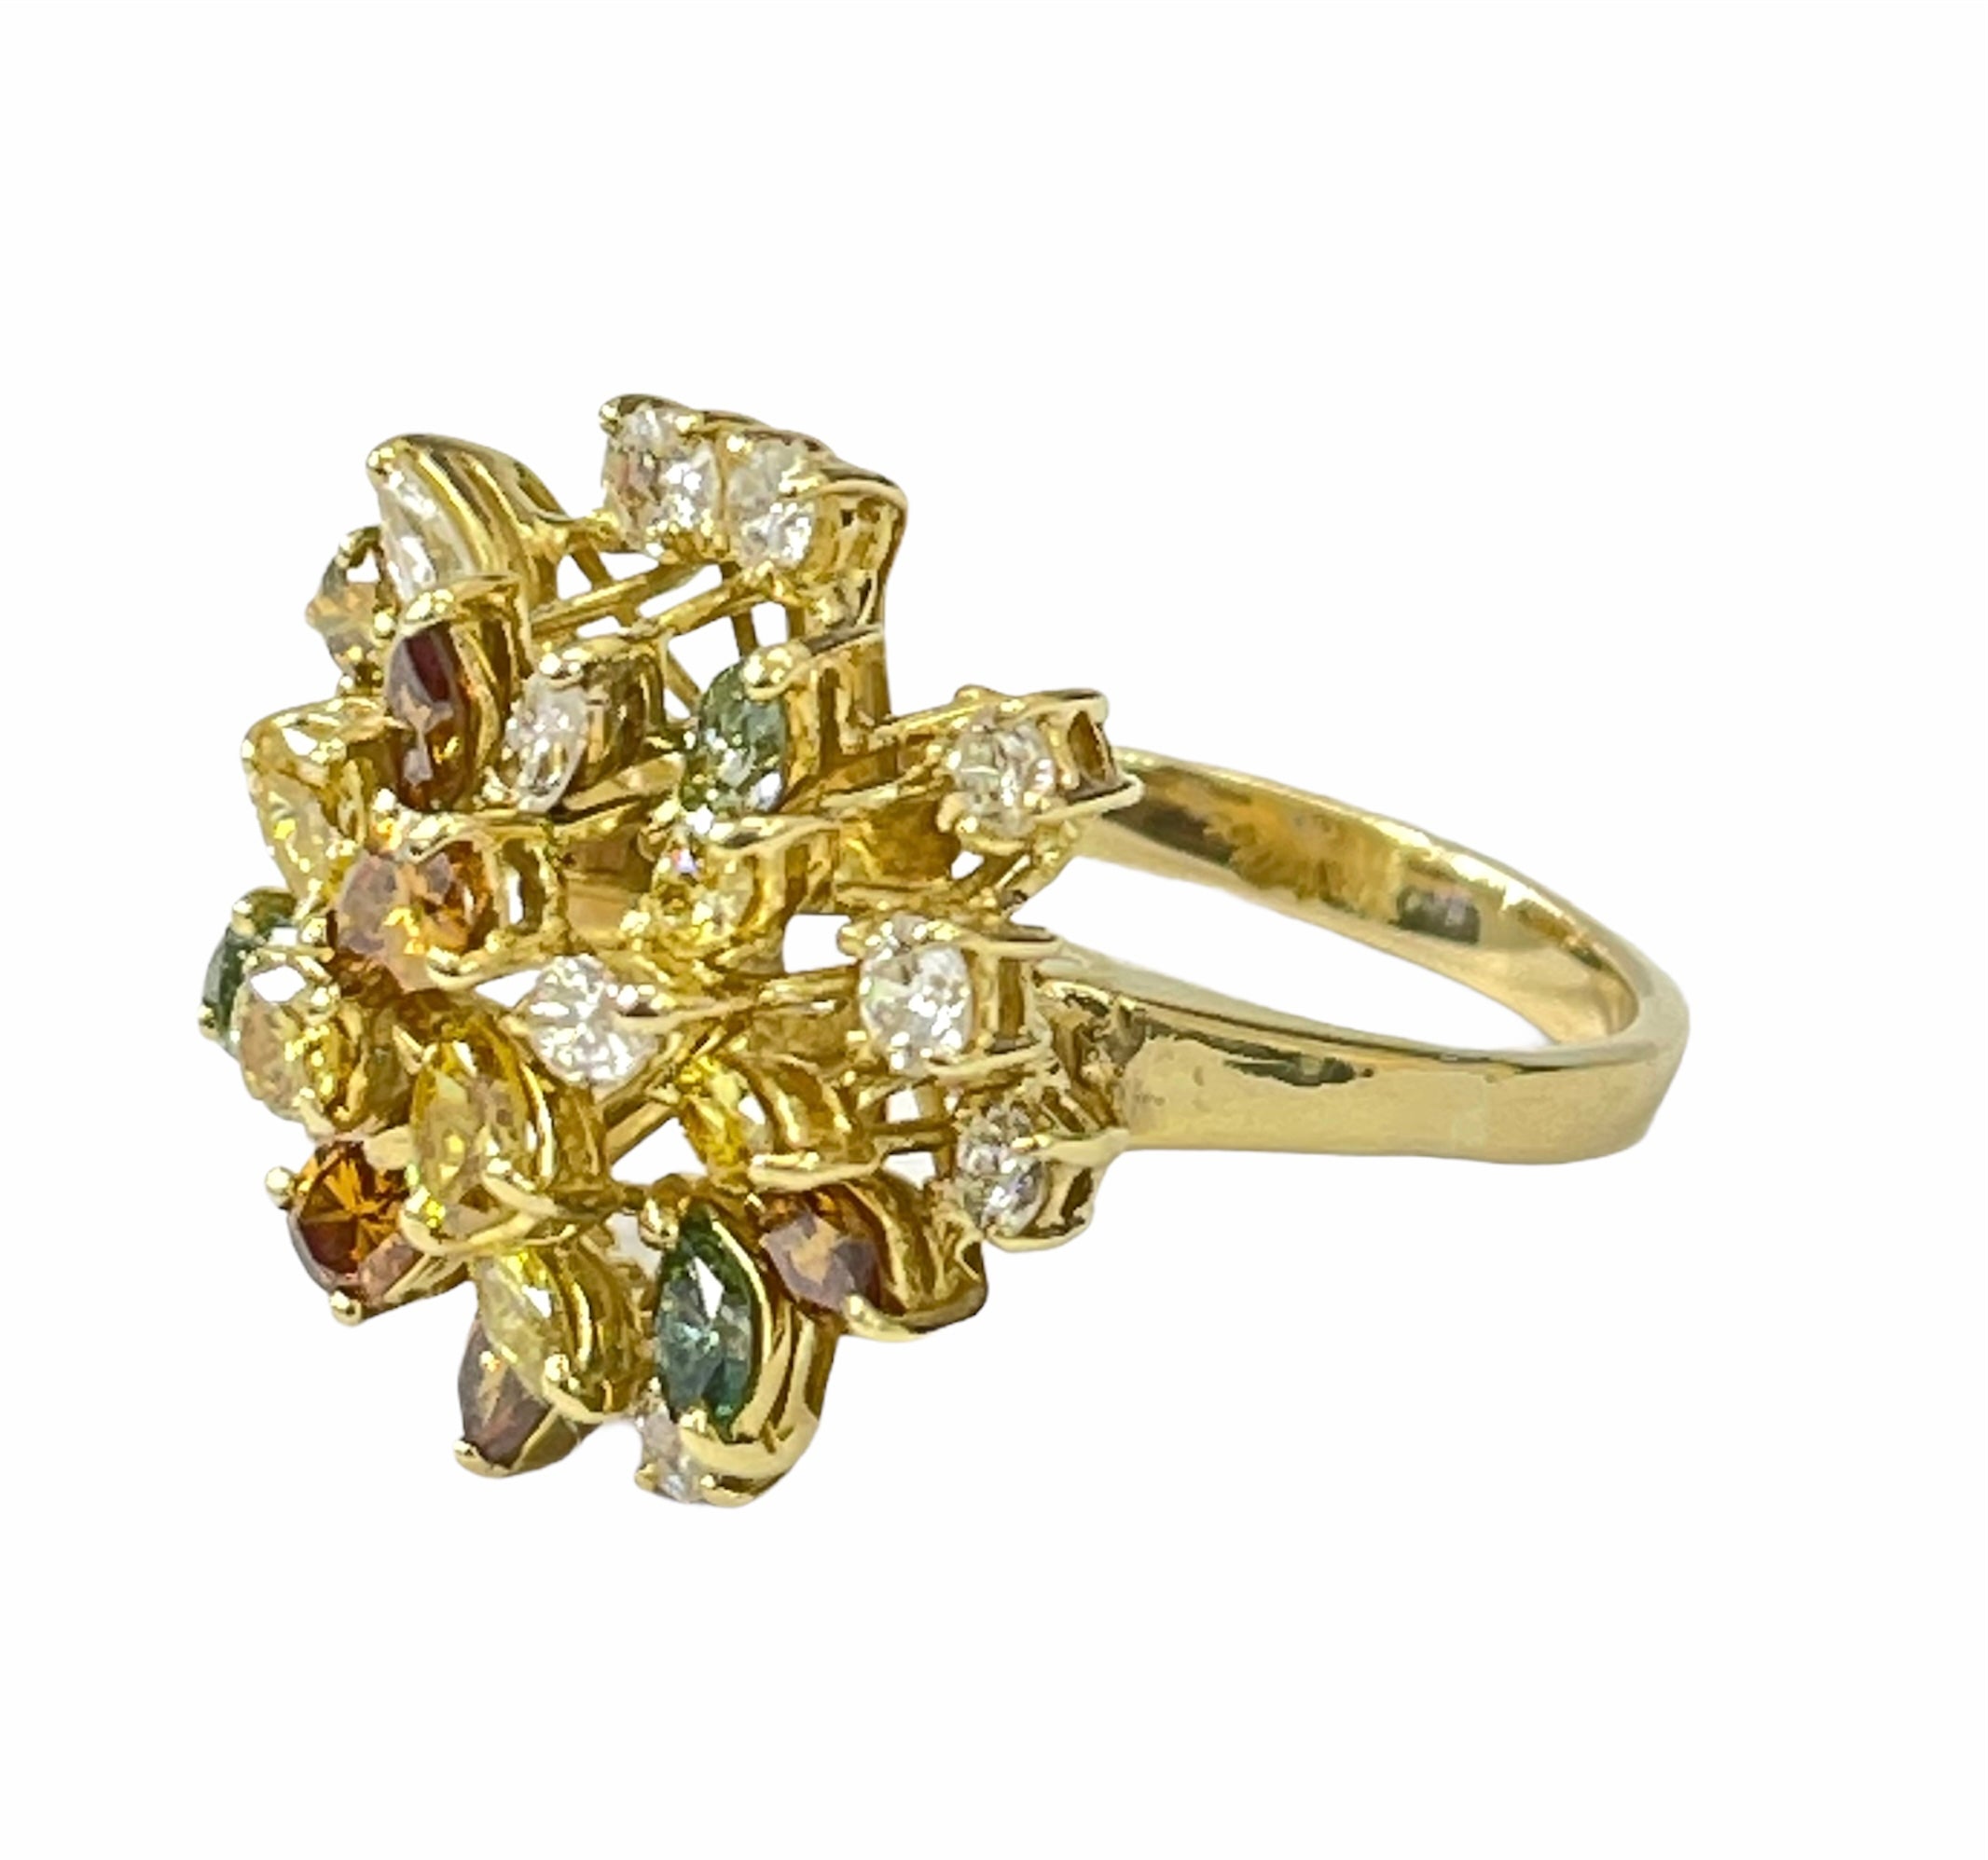 Multi Shaped Cluster Dome Diamond Ring 18kt Yellow Gold